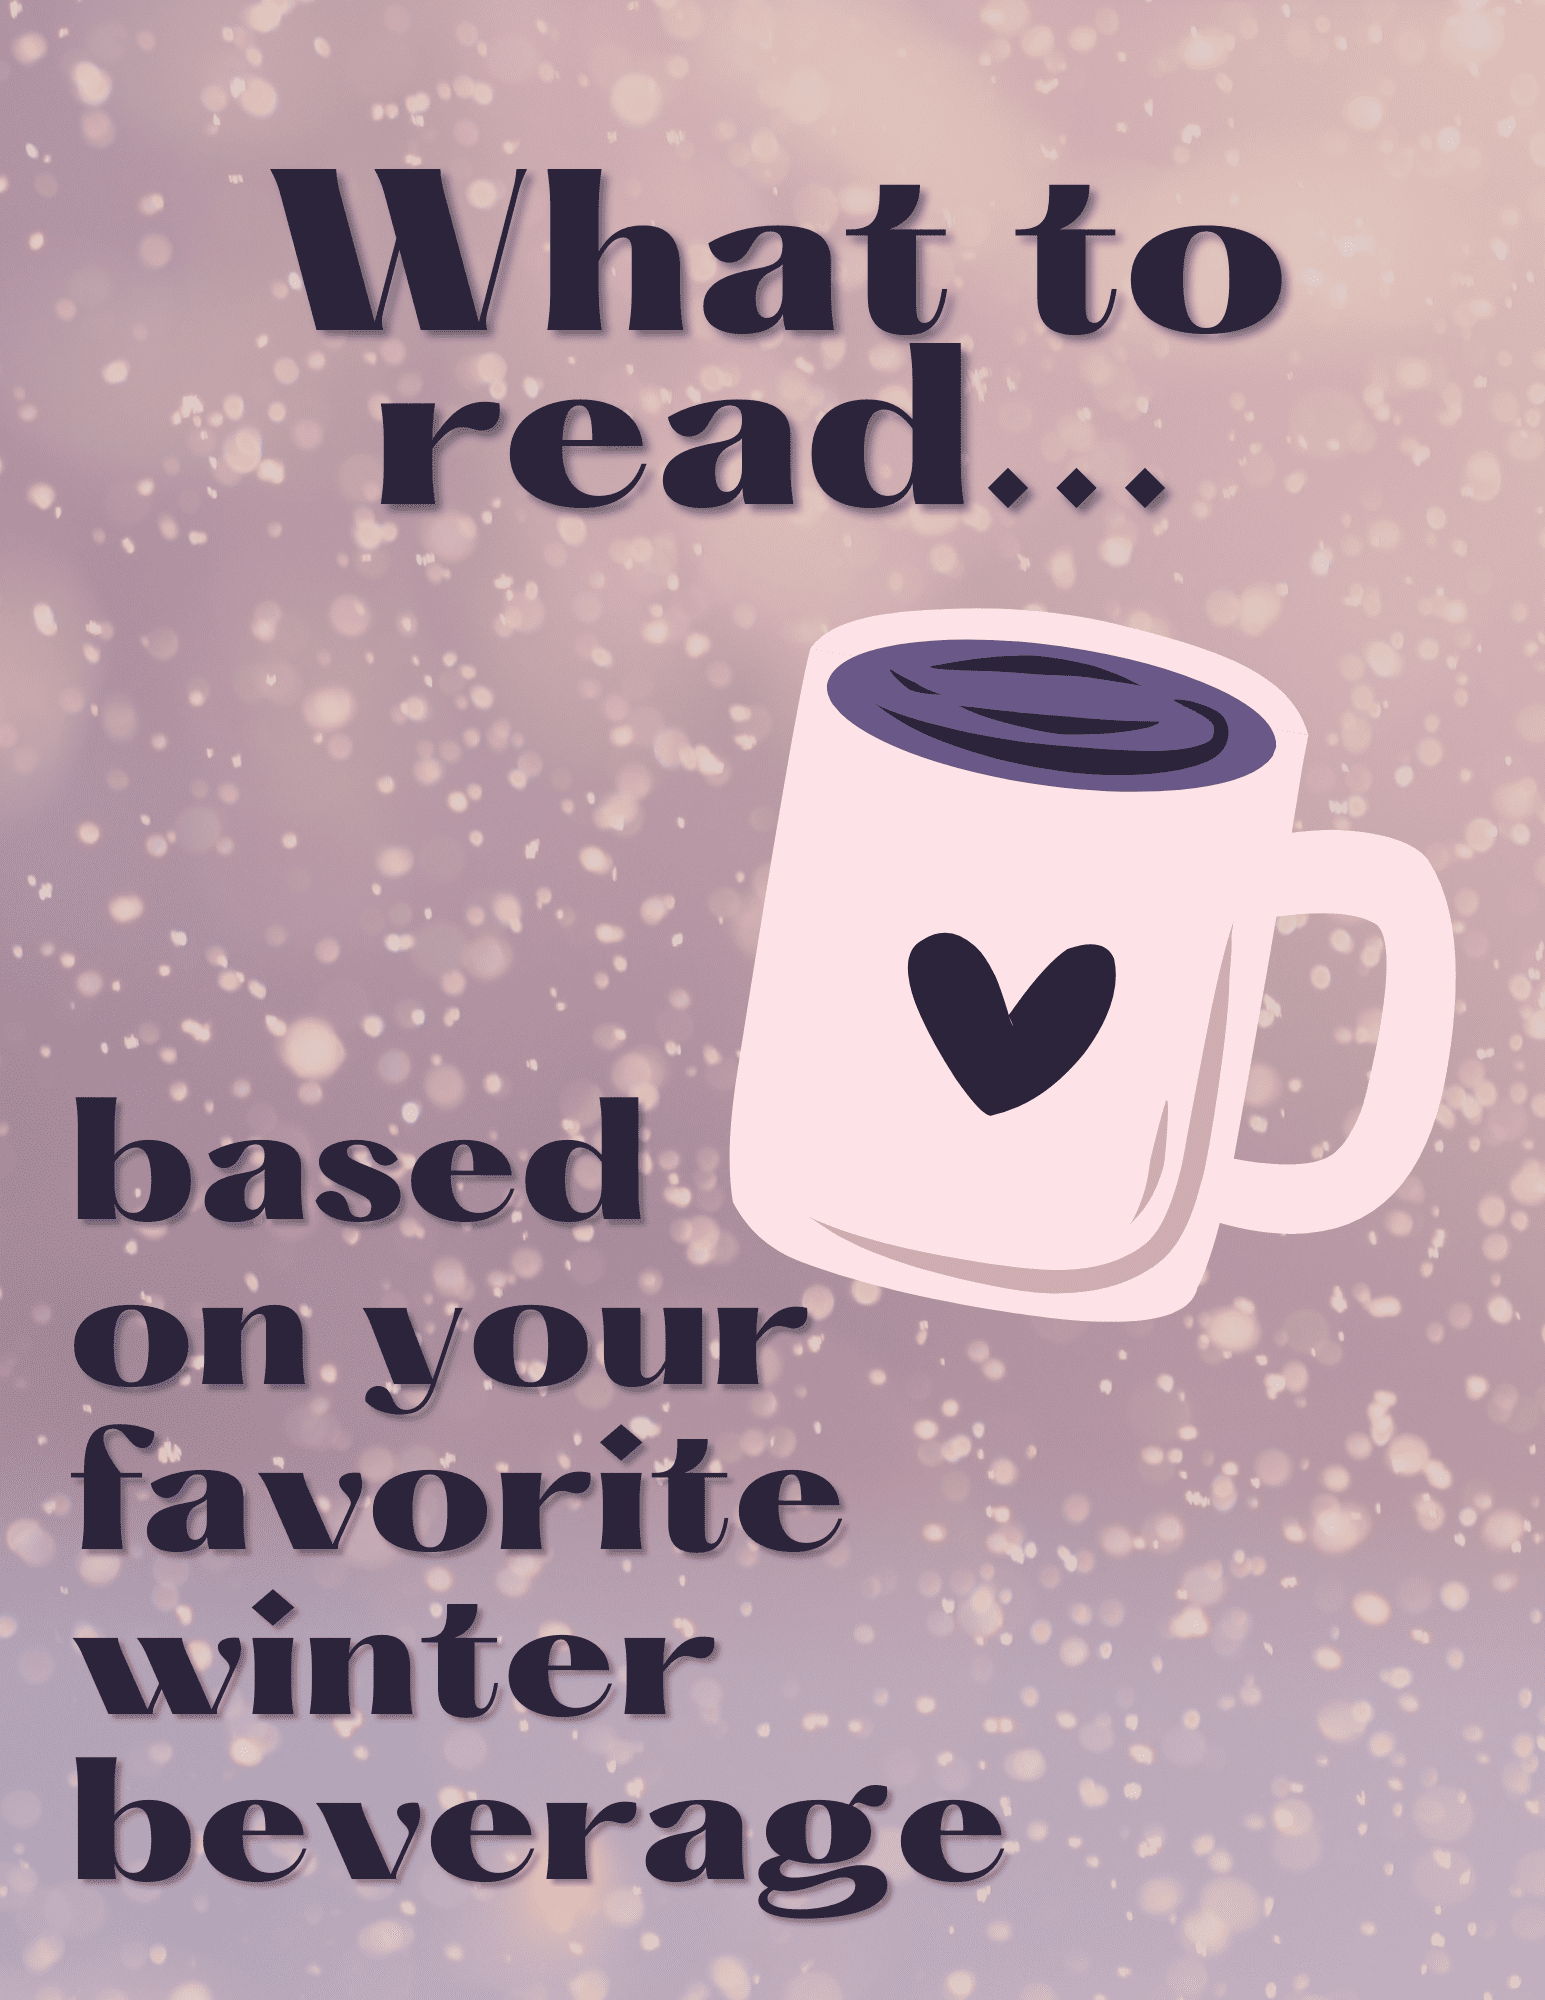 What to Read Based on Your Favorite Winter Beverage